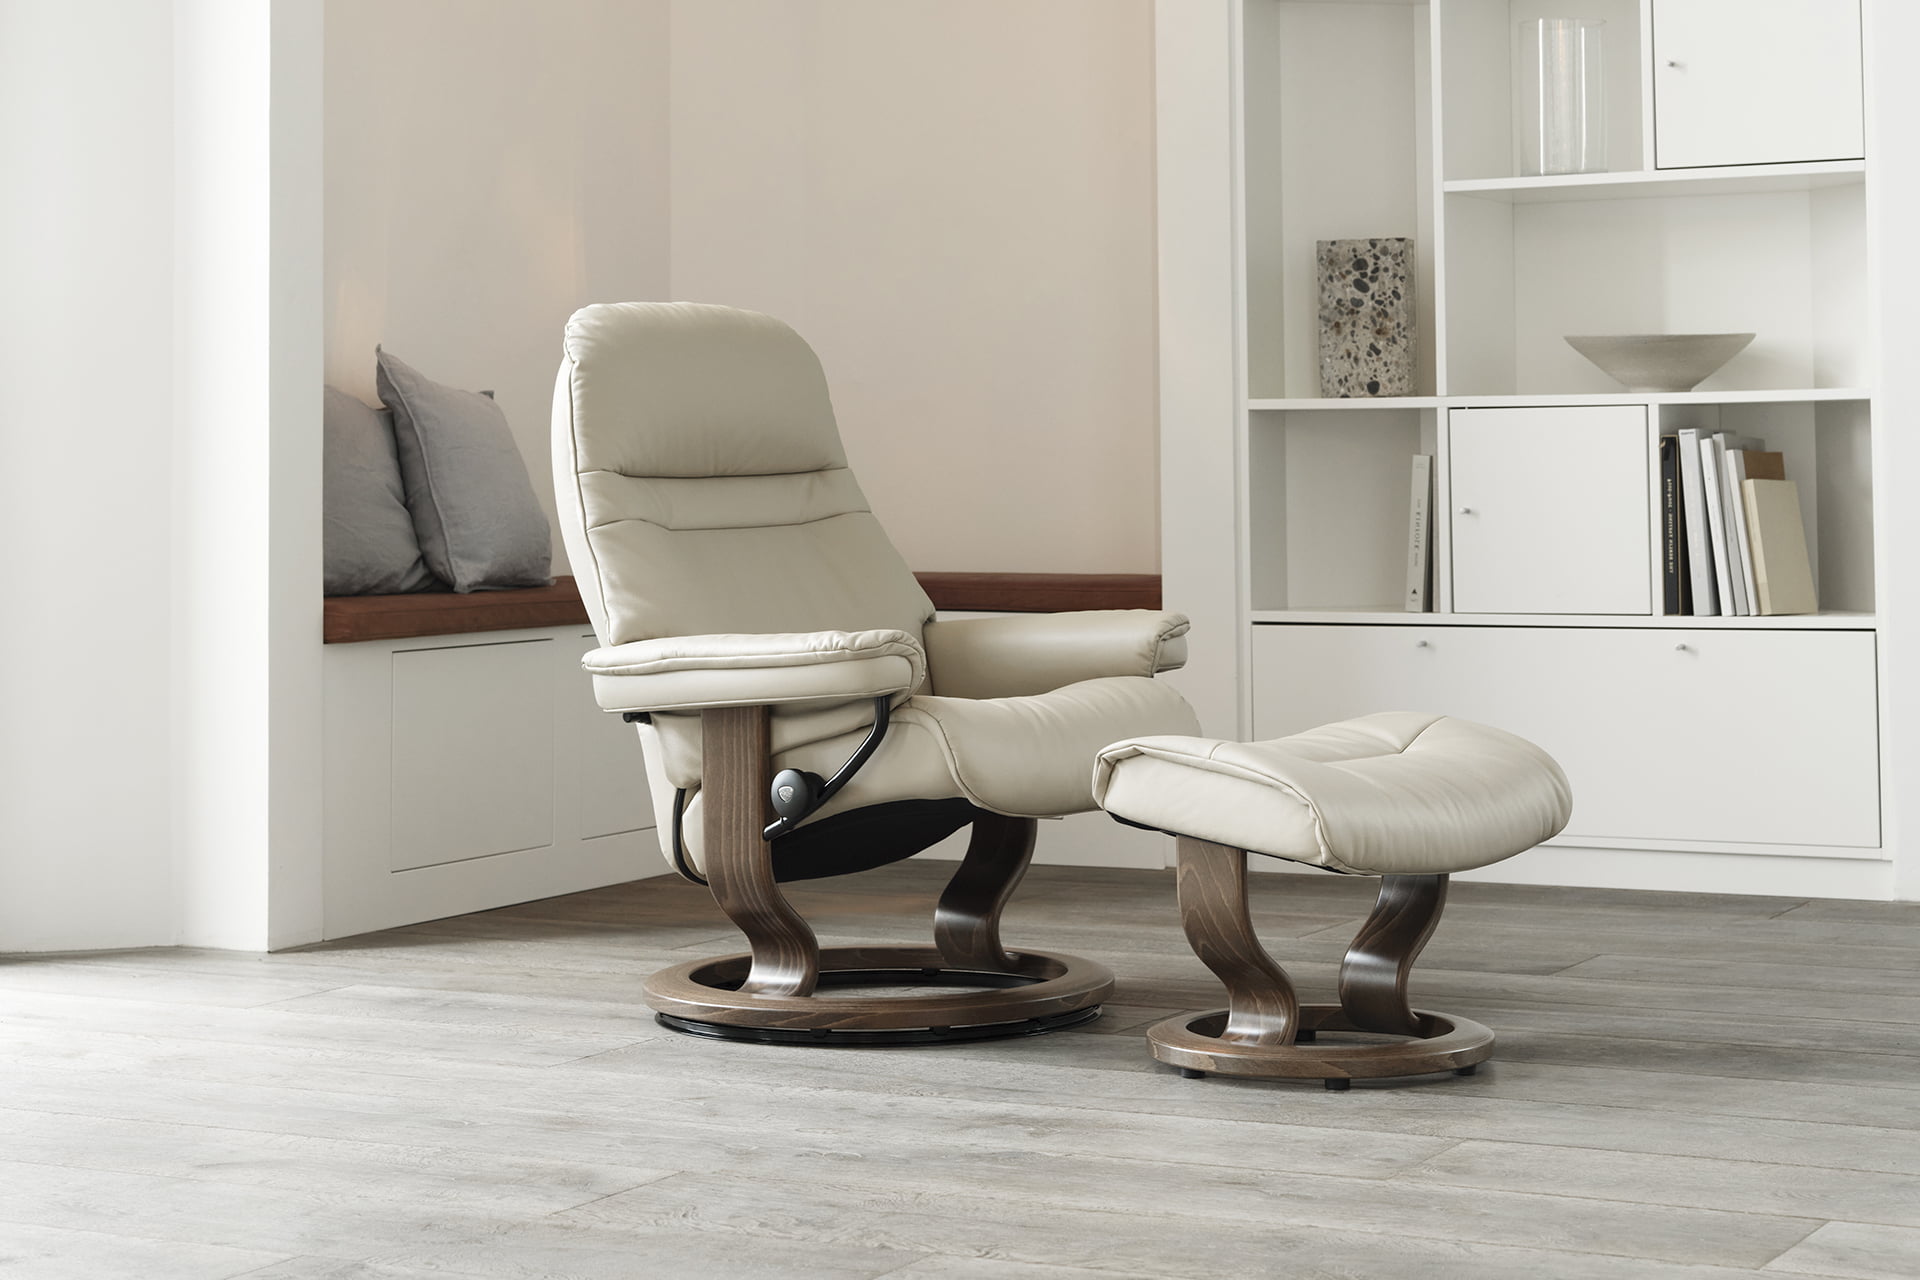 Stressless® recliner with a light interior